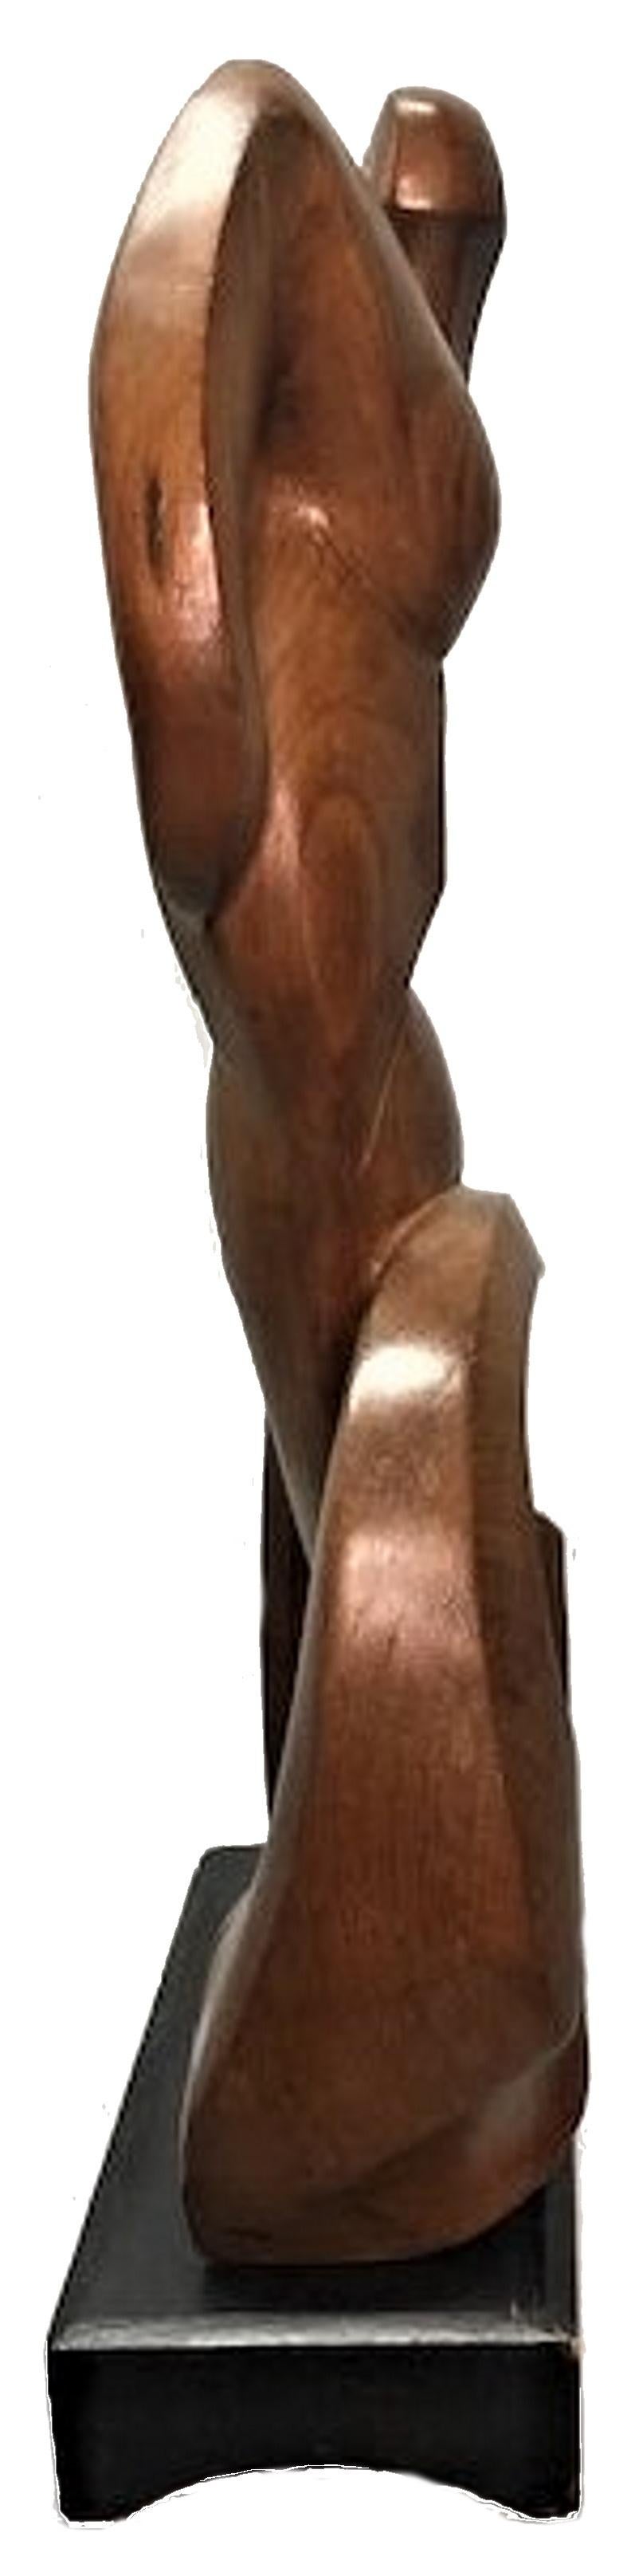 Hand-Carved Enid Bell Palanchian, Tackle, Modernist Carved Mahogany Sculpture, ca. 1953 For Sale